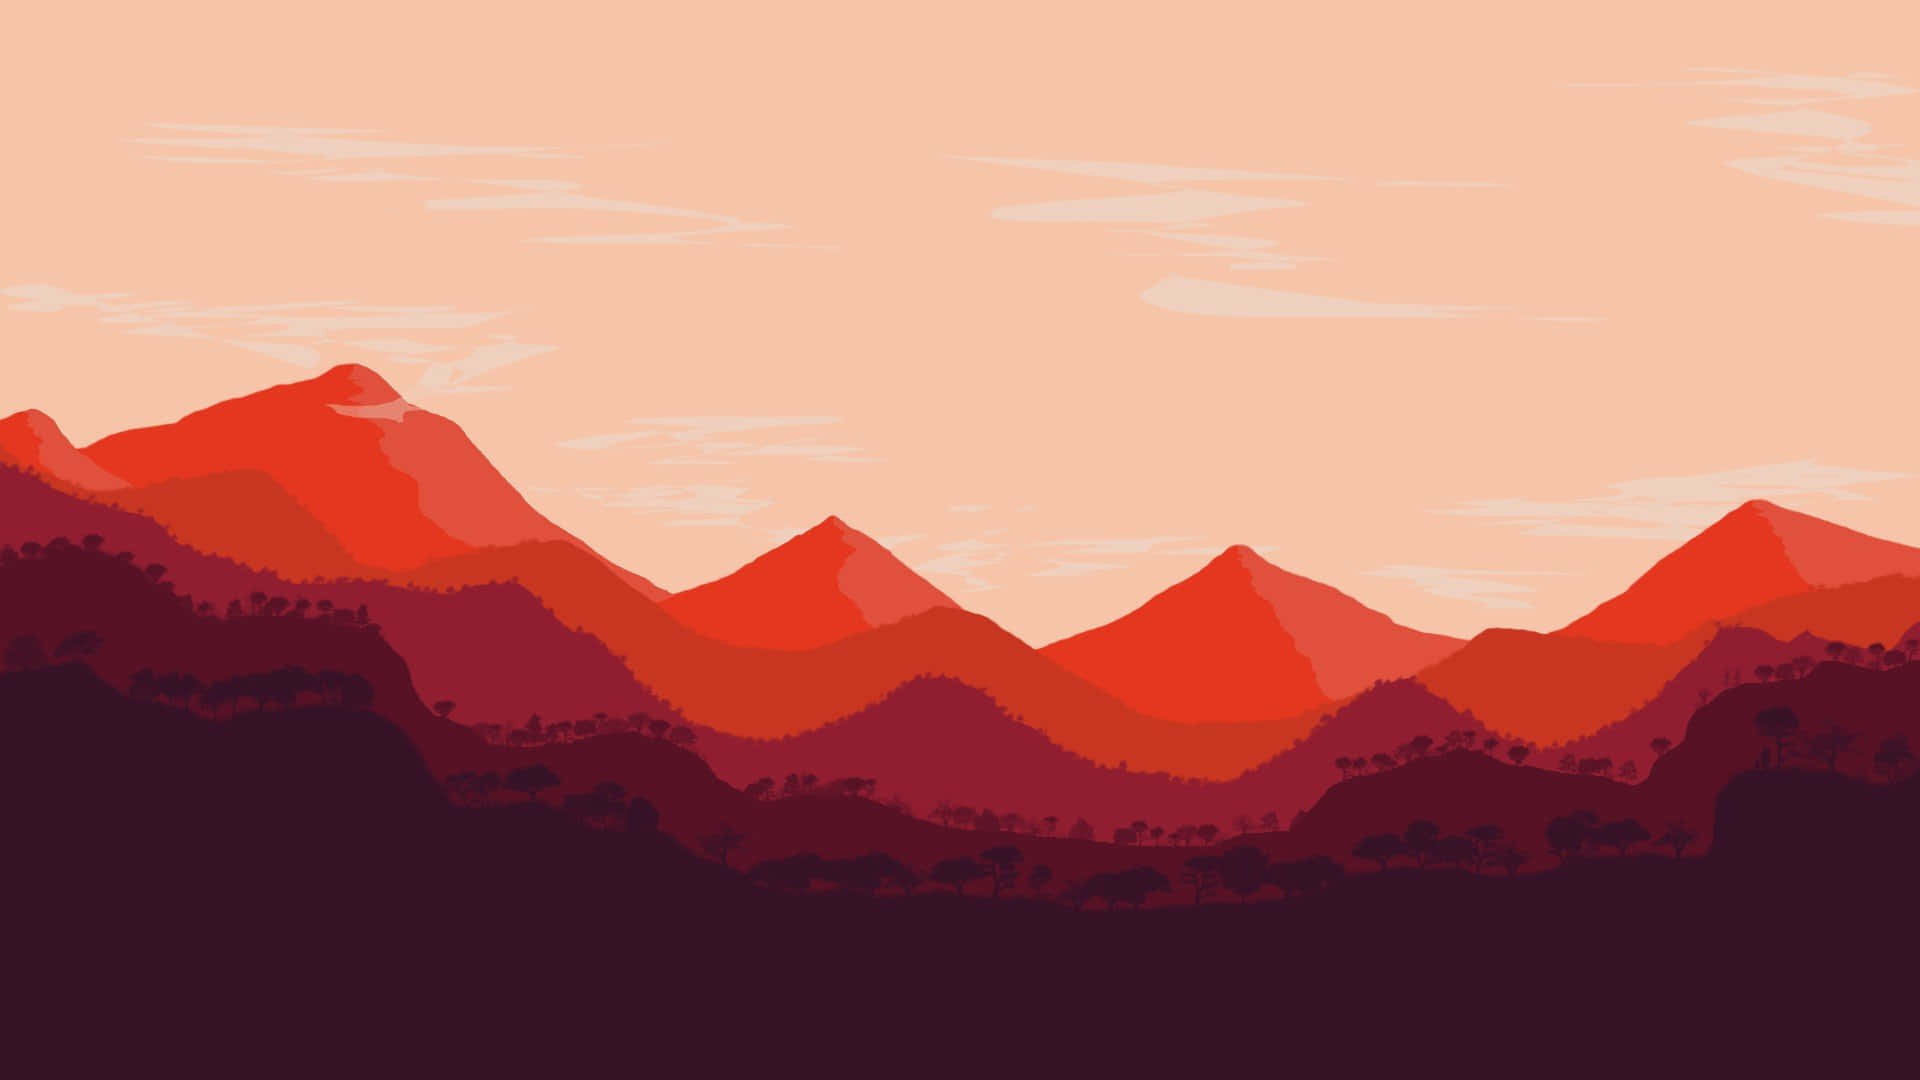 Abstract Mountain Silhouette Sunset Wallpaper